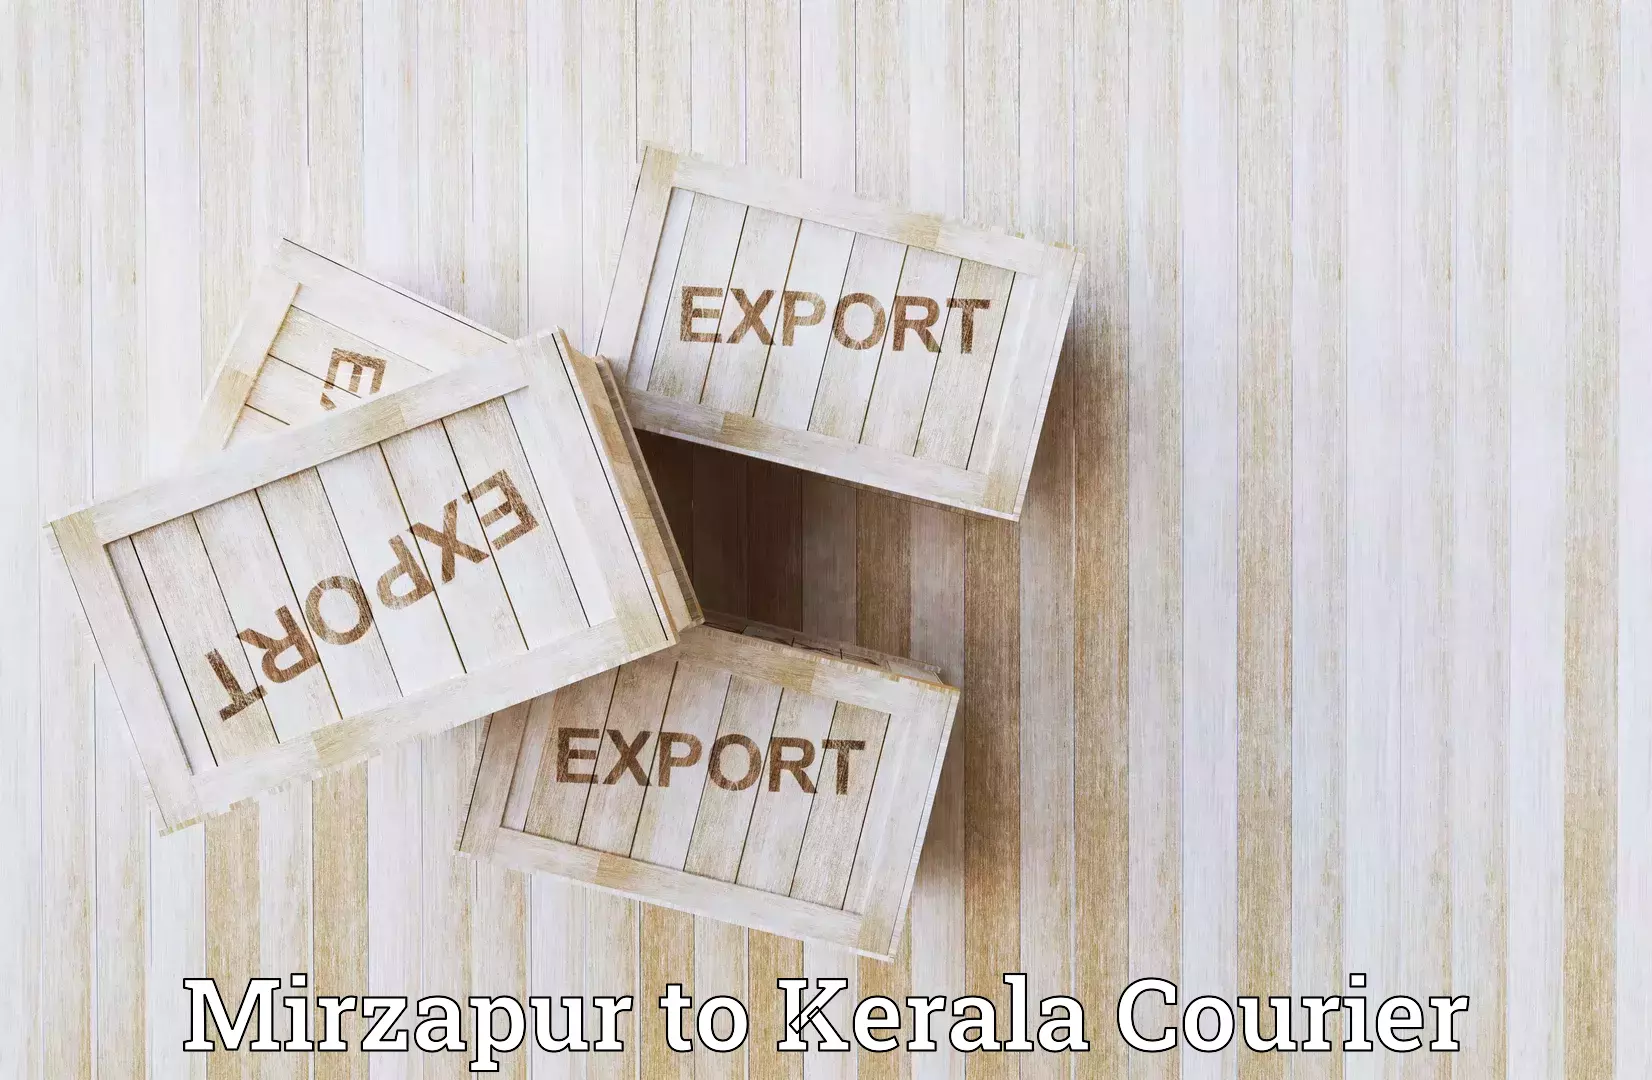 State-of-the-art courier technology Mirzapur to Kiliyanthara